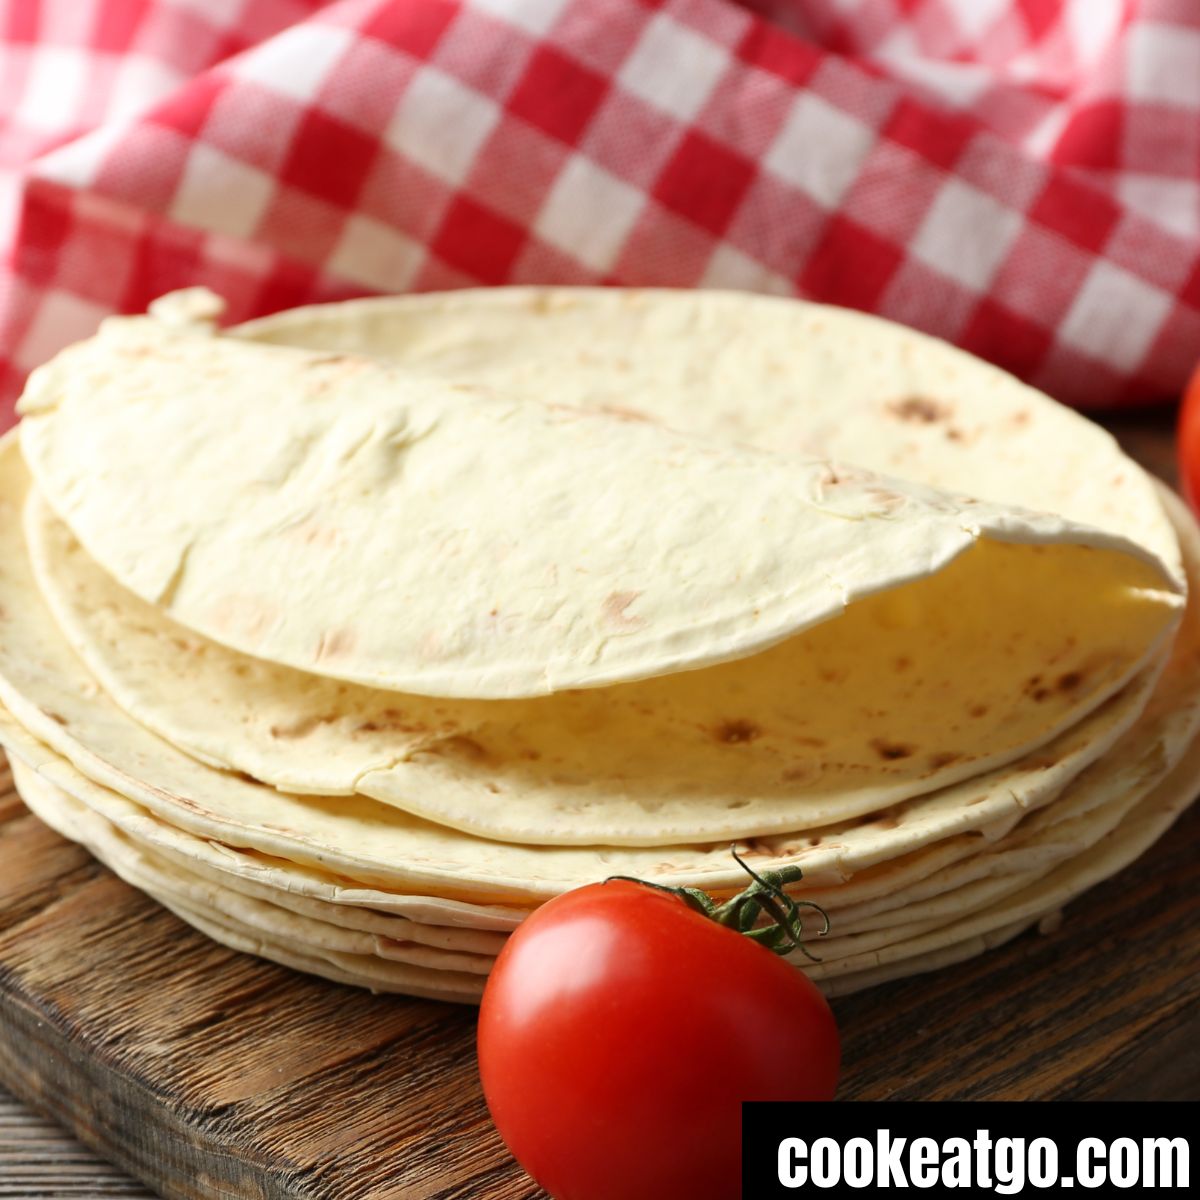 Stack of tortillas next to a tomato on a board with a red white checkered napking